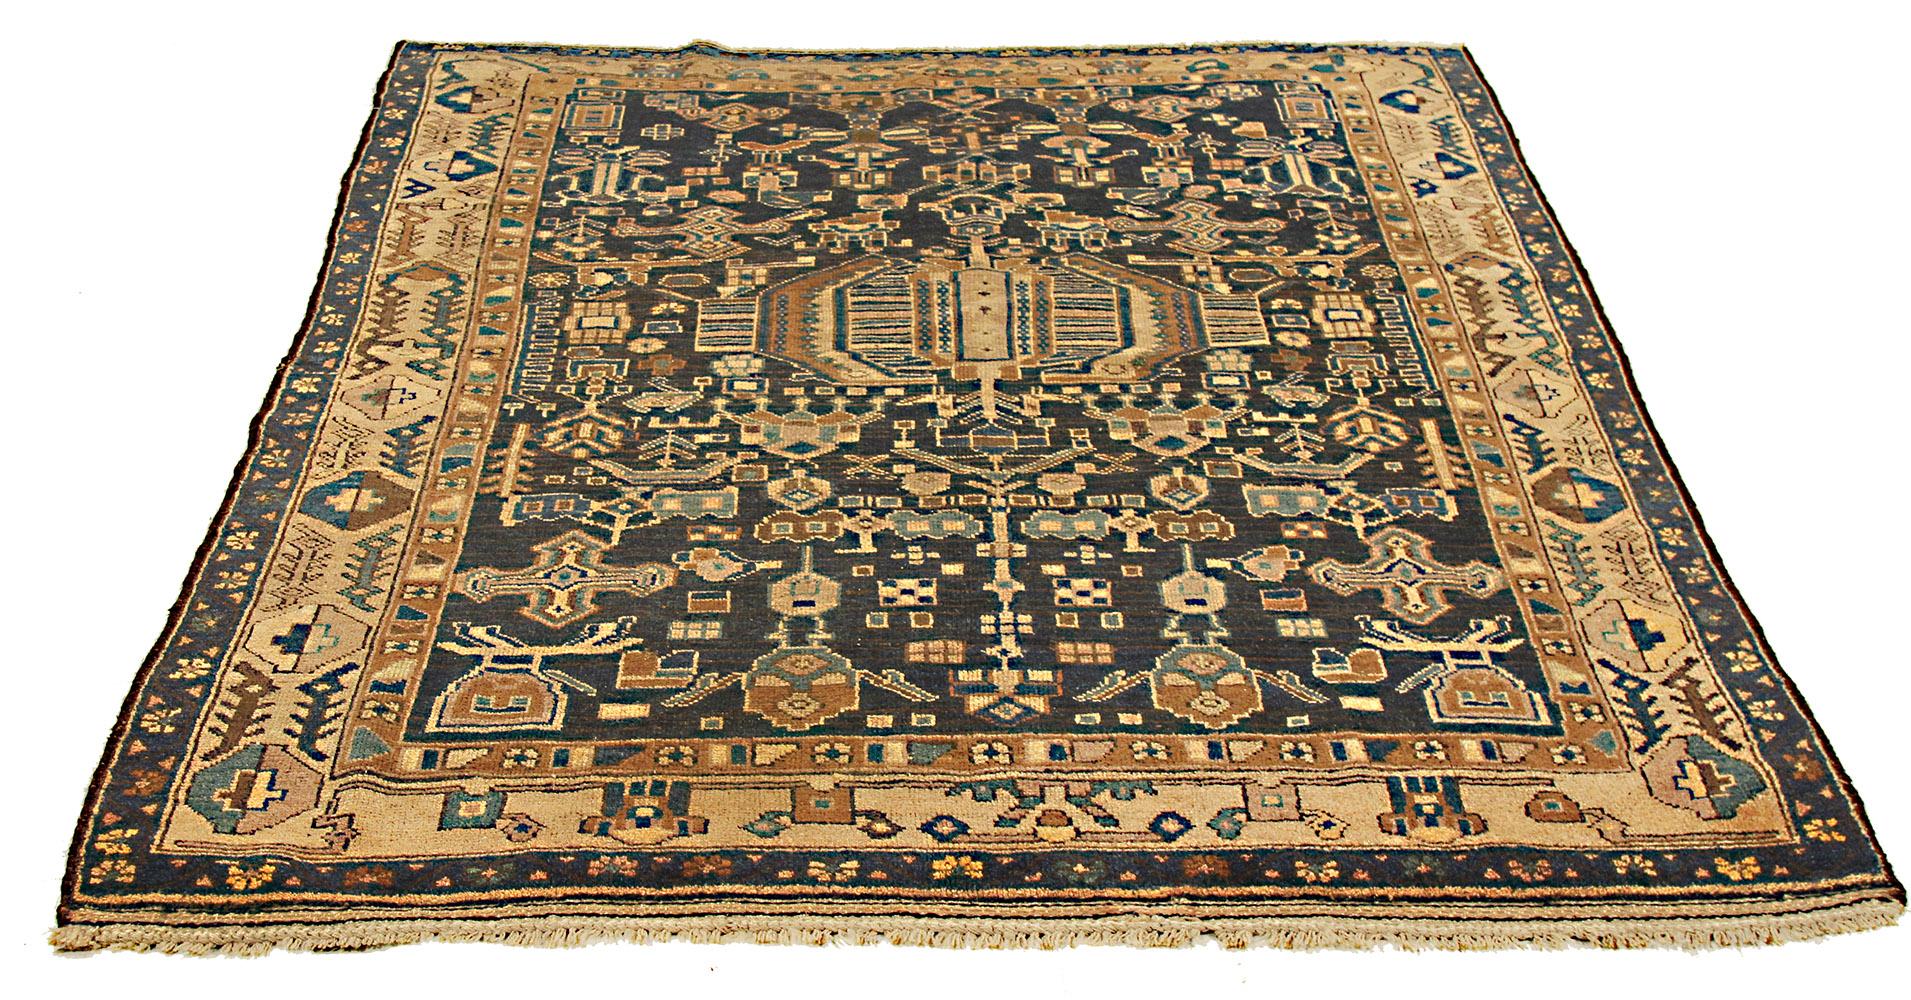 Antique Persian rug handwoven from the finest sheep’s wool and colored with all-natural vegetable dyes that are safe for humans and pets. It’s a traditional Kurdish design highlighted by large and small geometric medallions in blue and brown over a